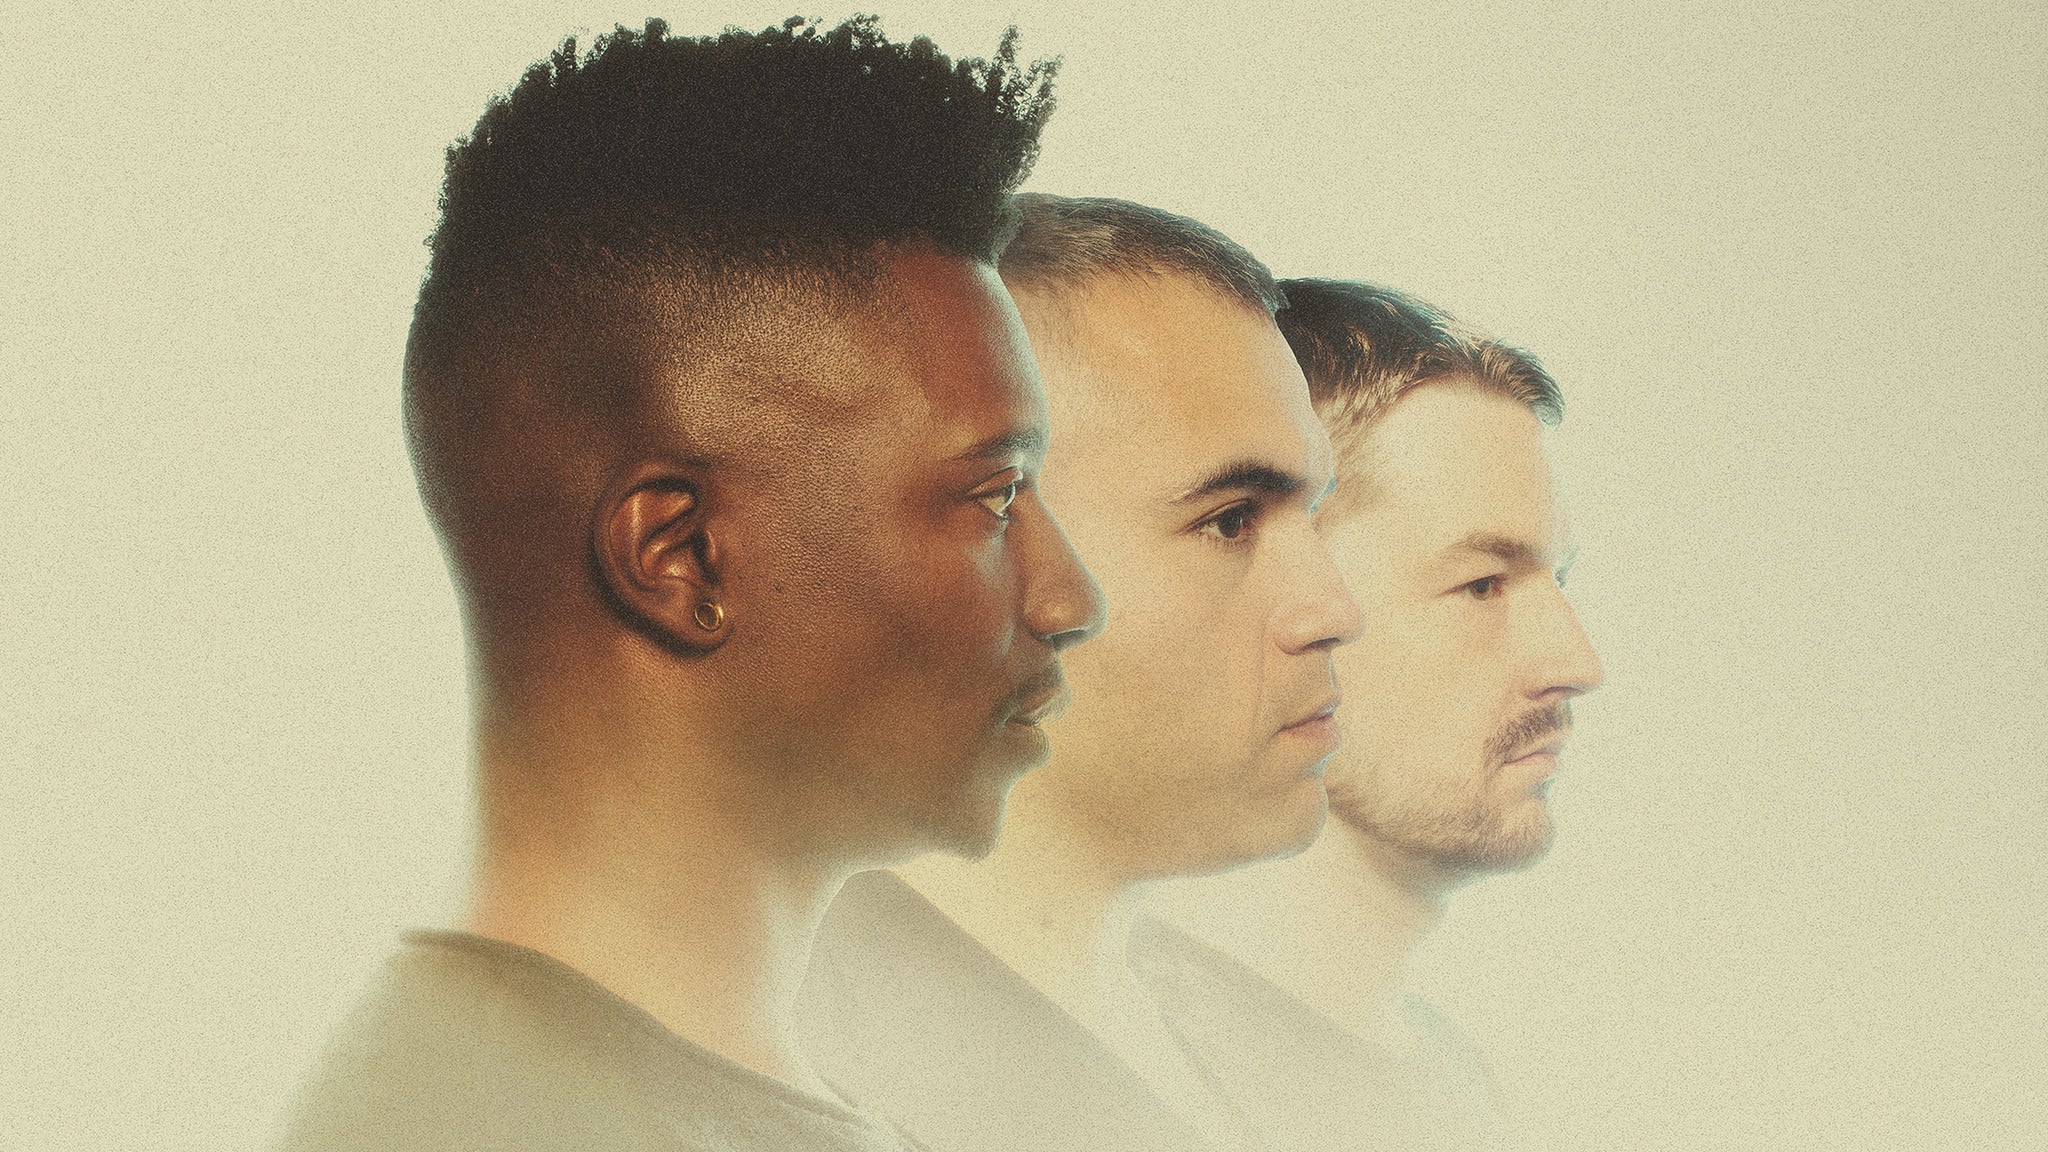 ANIMALS AS LEADERS - Parrhesia Tour at Marquee Theatre